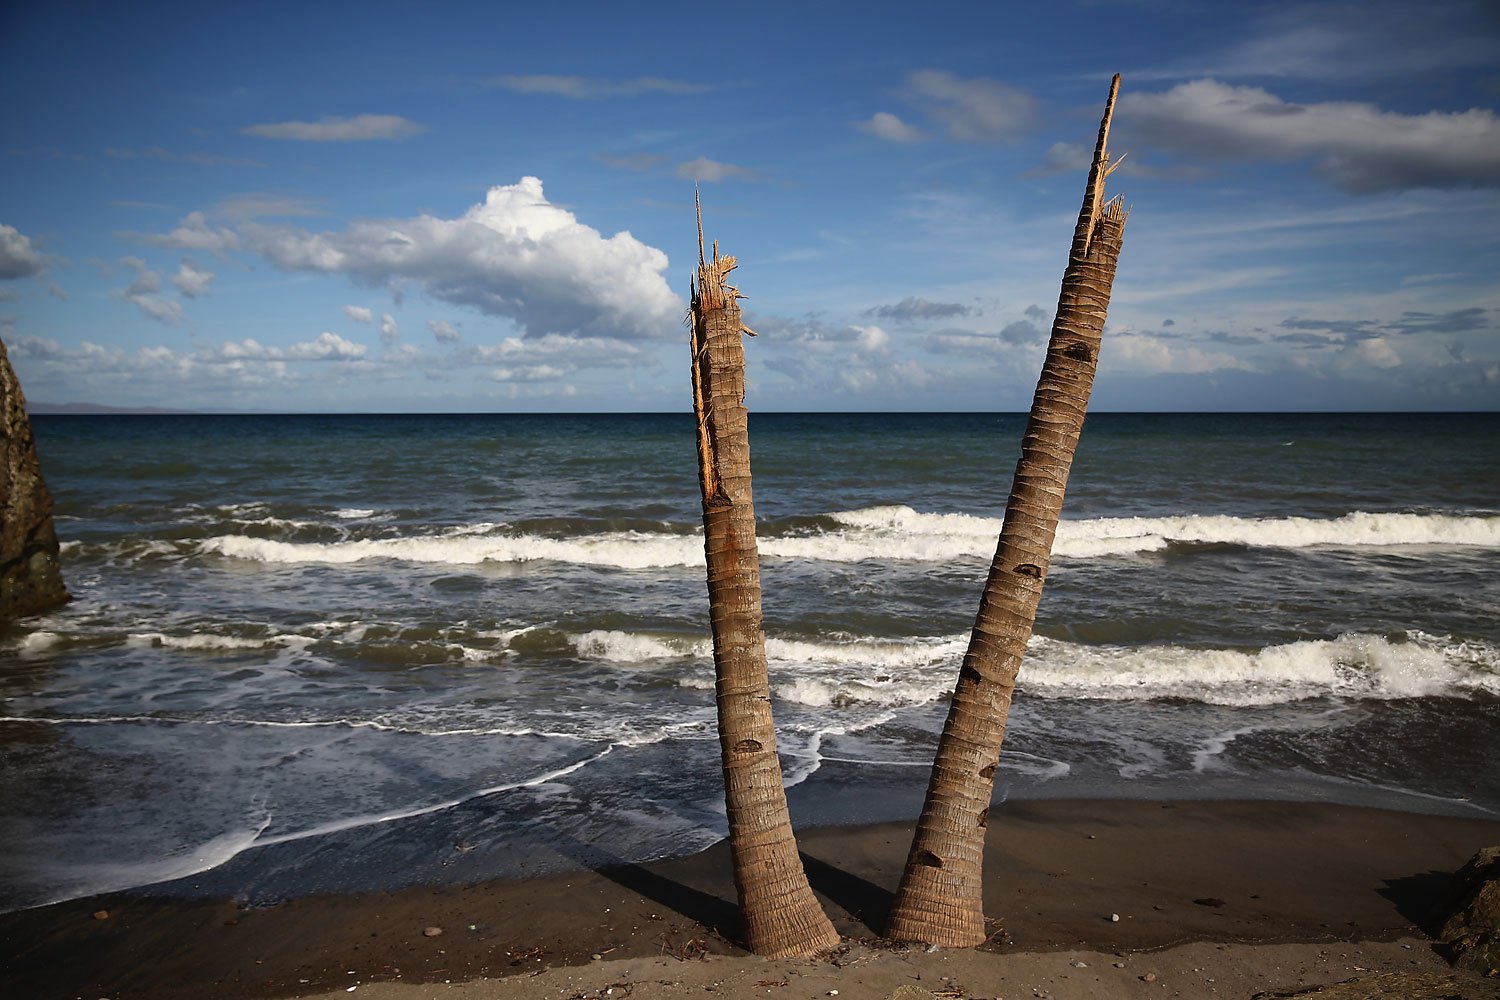 Two broken palm trees stand snapped in half on the beach near Tanauan, on November 19, 2013 in Leyte, Philippines.